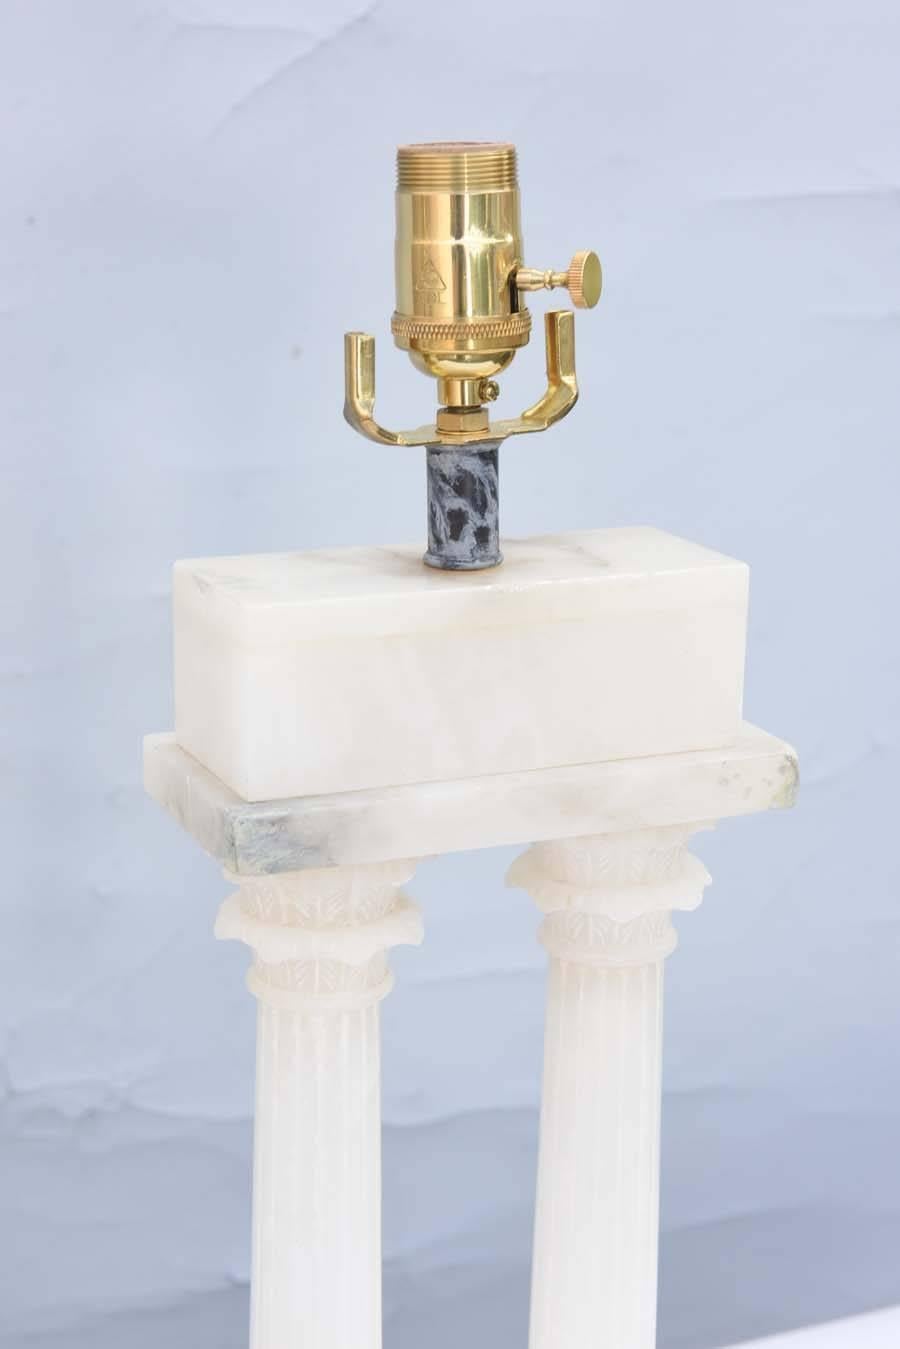 Pair of neoclassical style lamps, of carved alabaster, each a fluted column, with Corinthian capital, supporting a rectangular frieze, lamped on black marble bases.

Stock ID: D9287